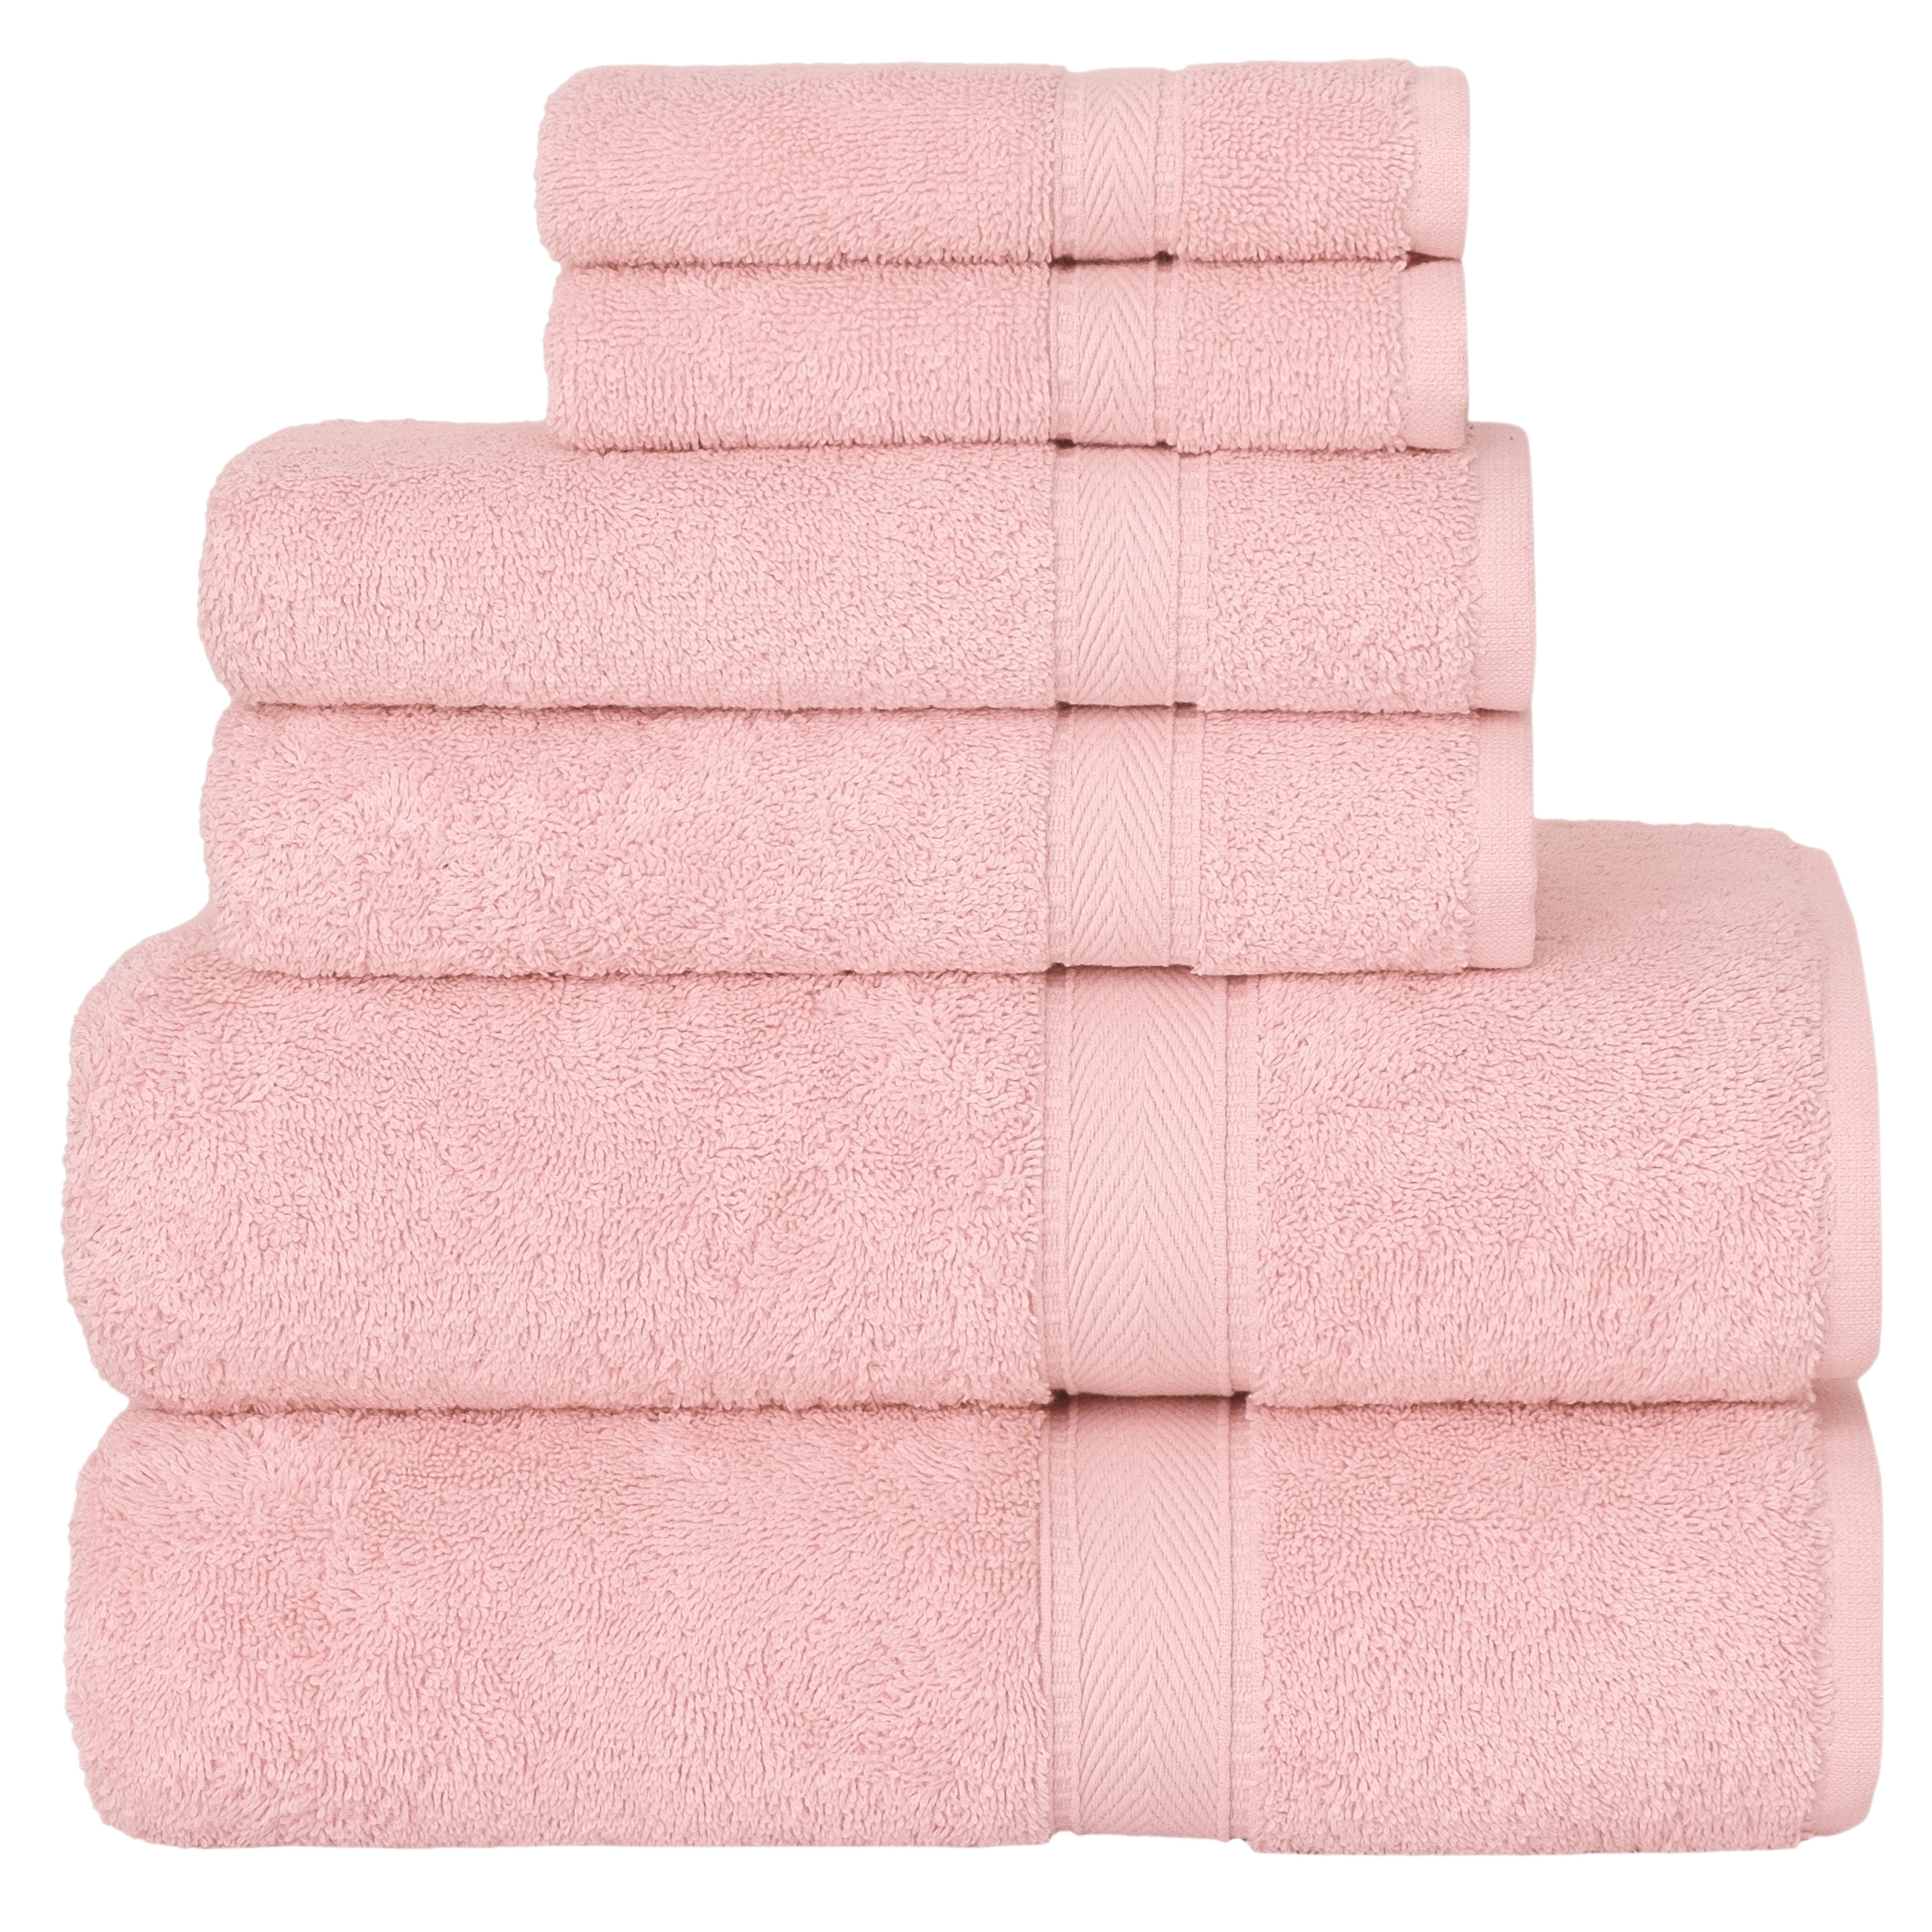 https://ak1.ostkcdn.com/images/products/is/images/direct/025f450cd12f68b4604e1d9ce0b8f3289050caa2/Authentic-Hotel-and-Spa-Turkish-Cotton-6-piece-Towel-Set.jpg